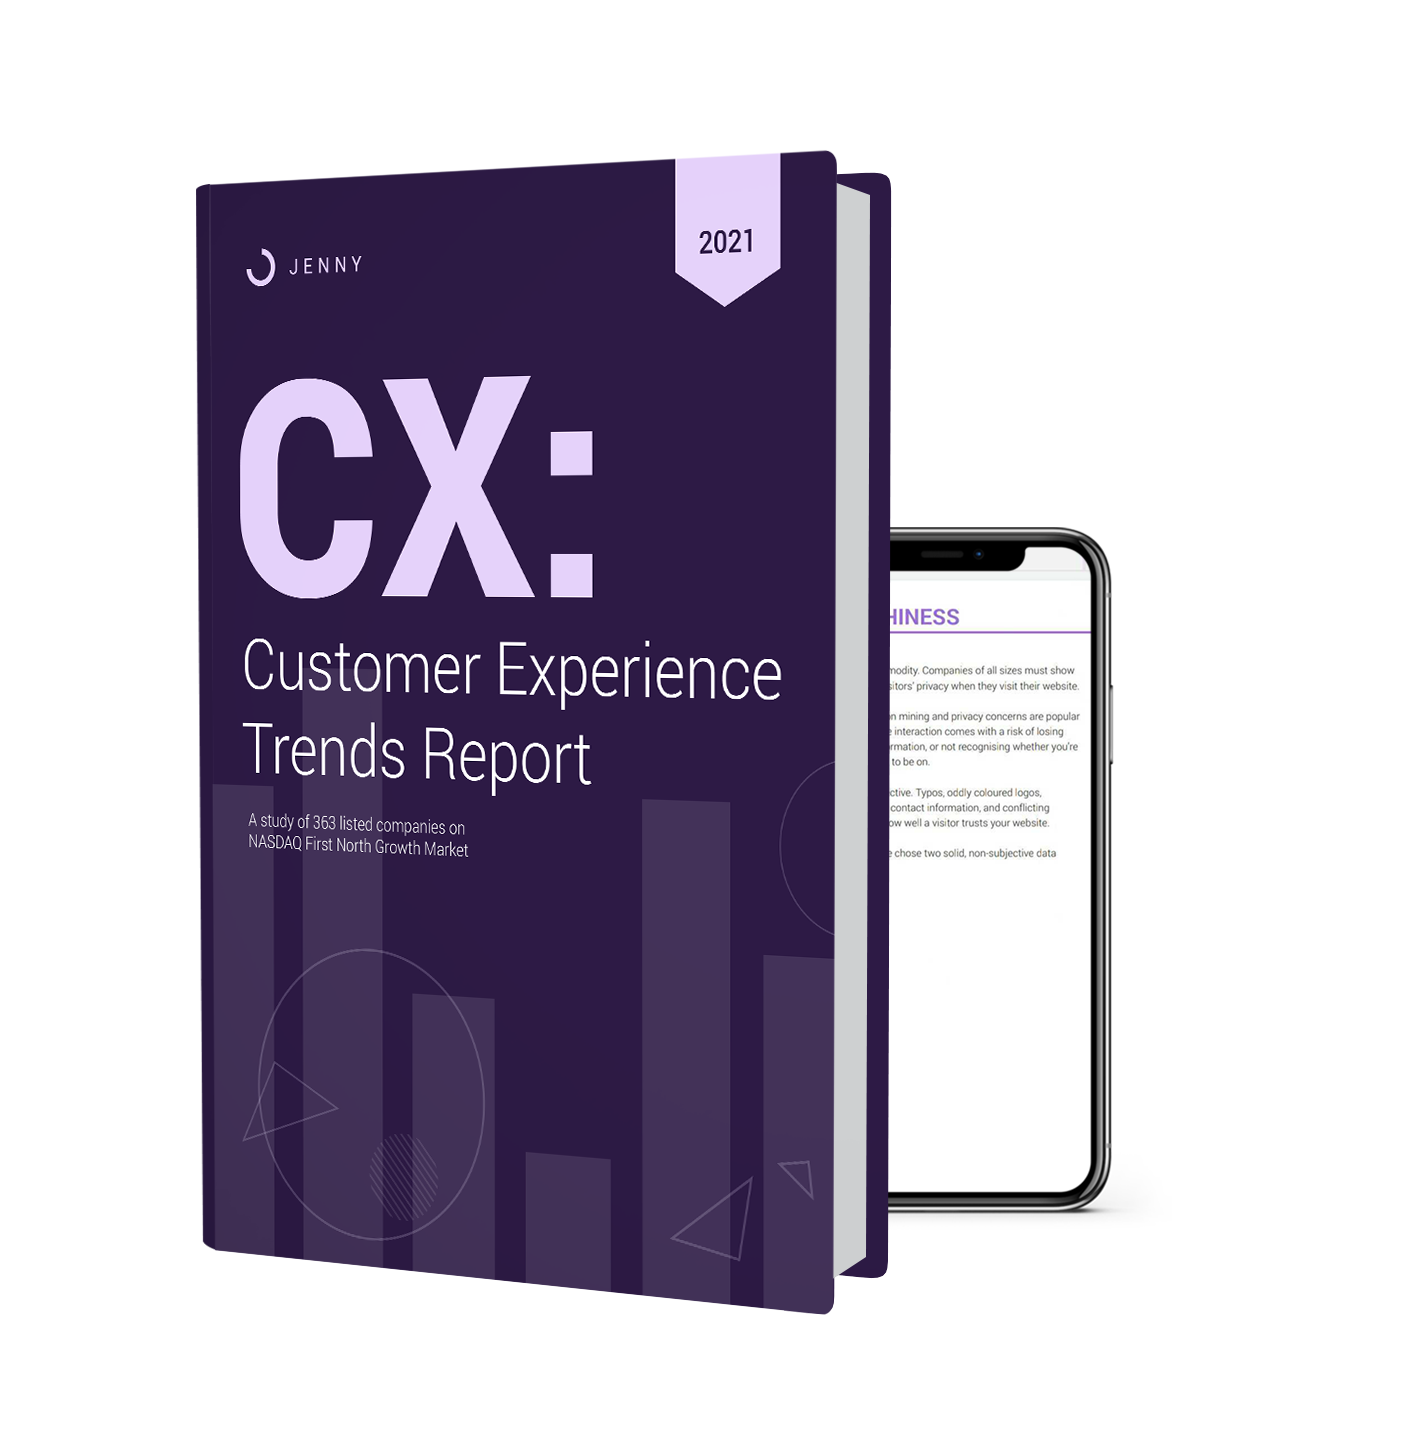 Customer Experience Trends Report for 2021 by GetJenny